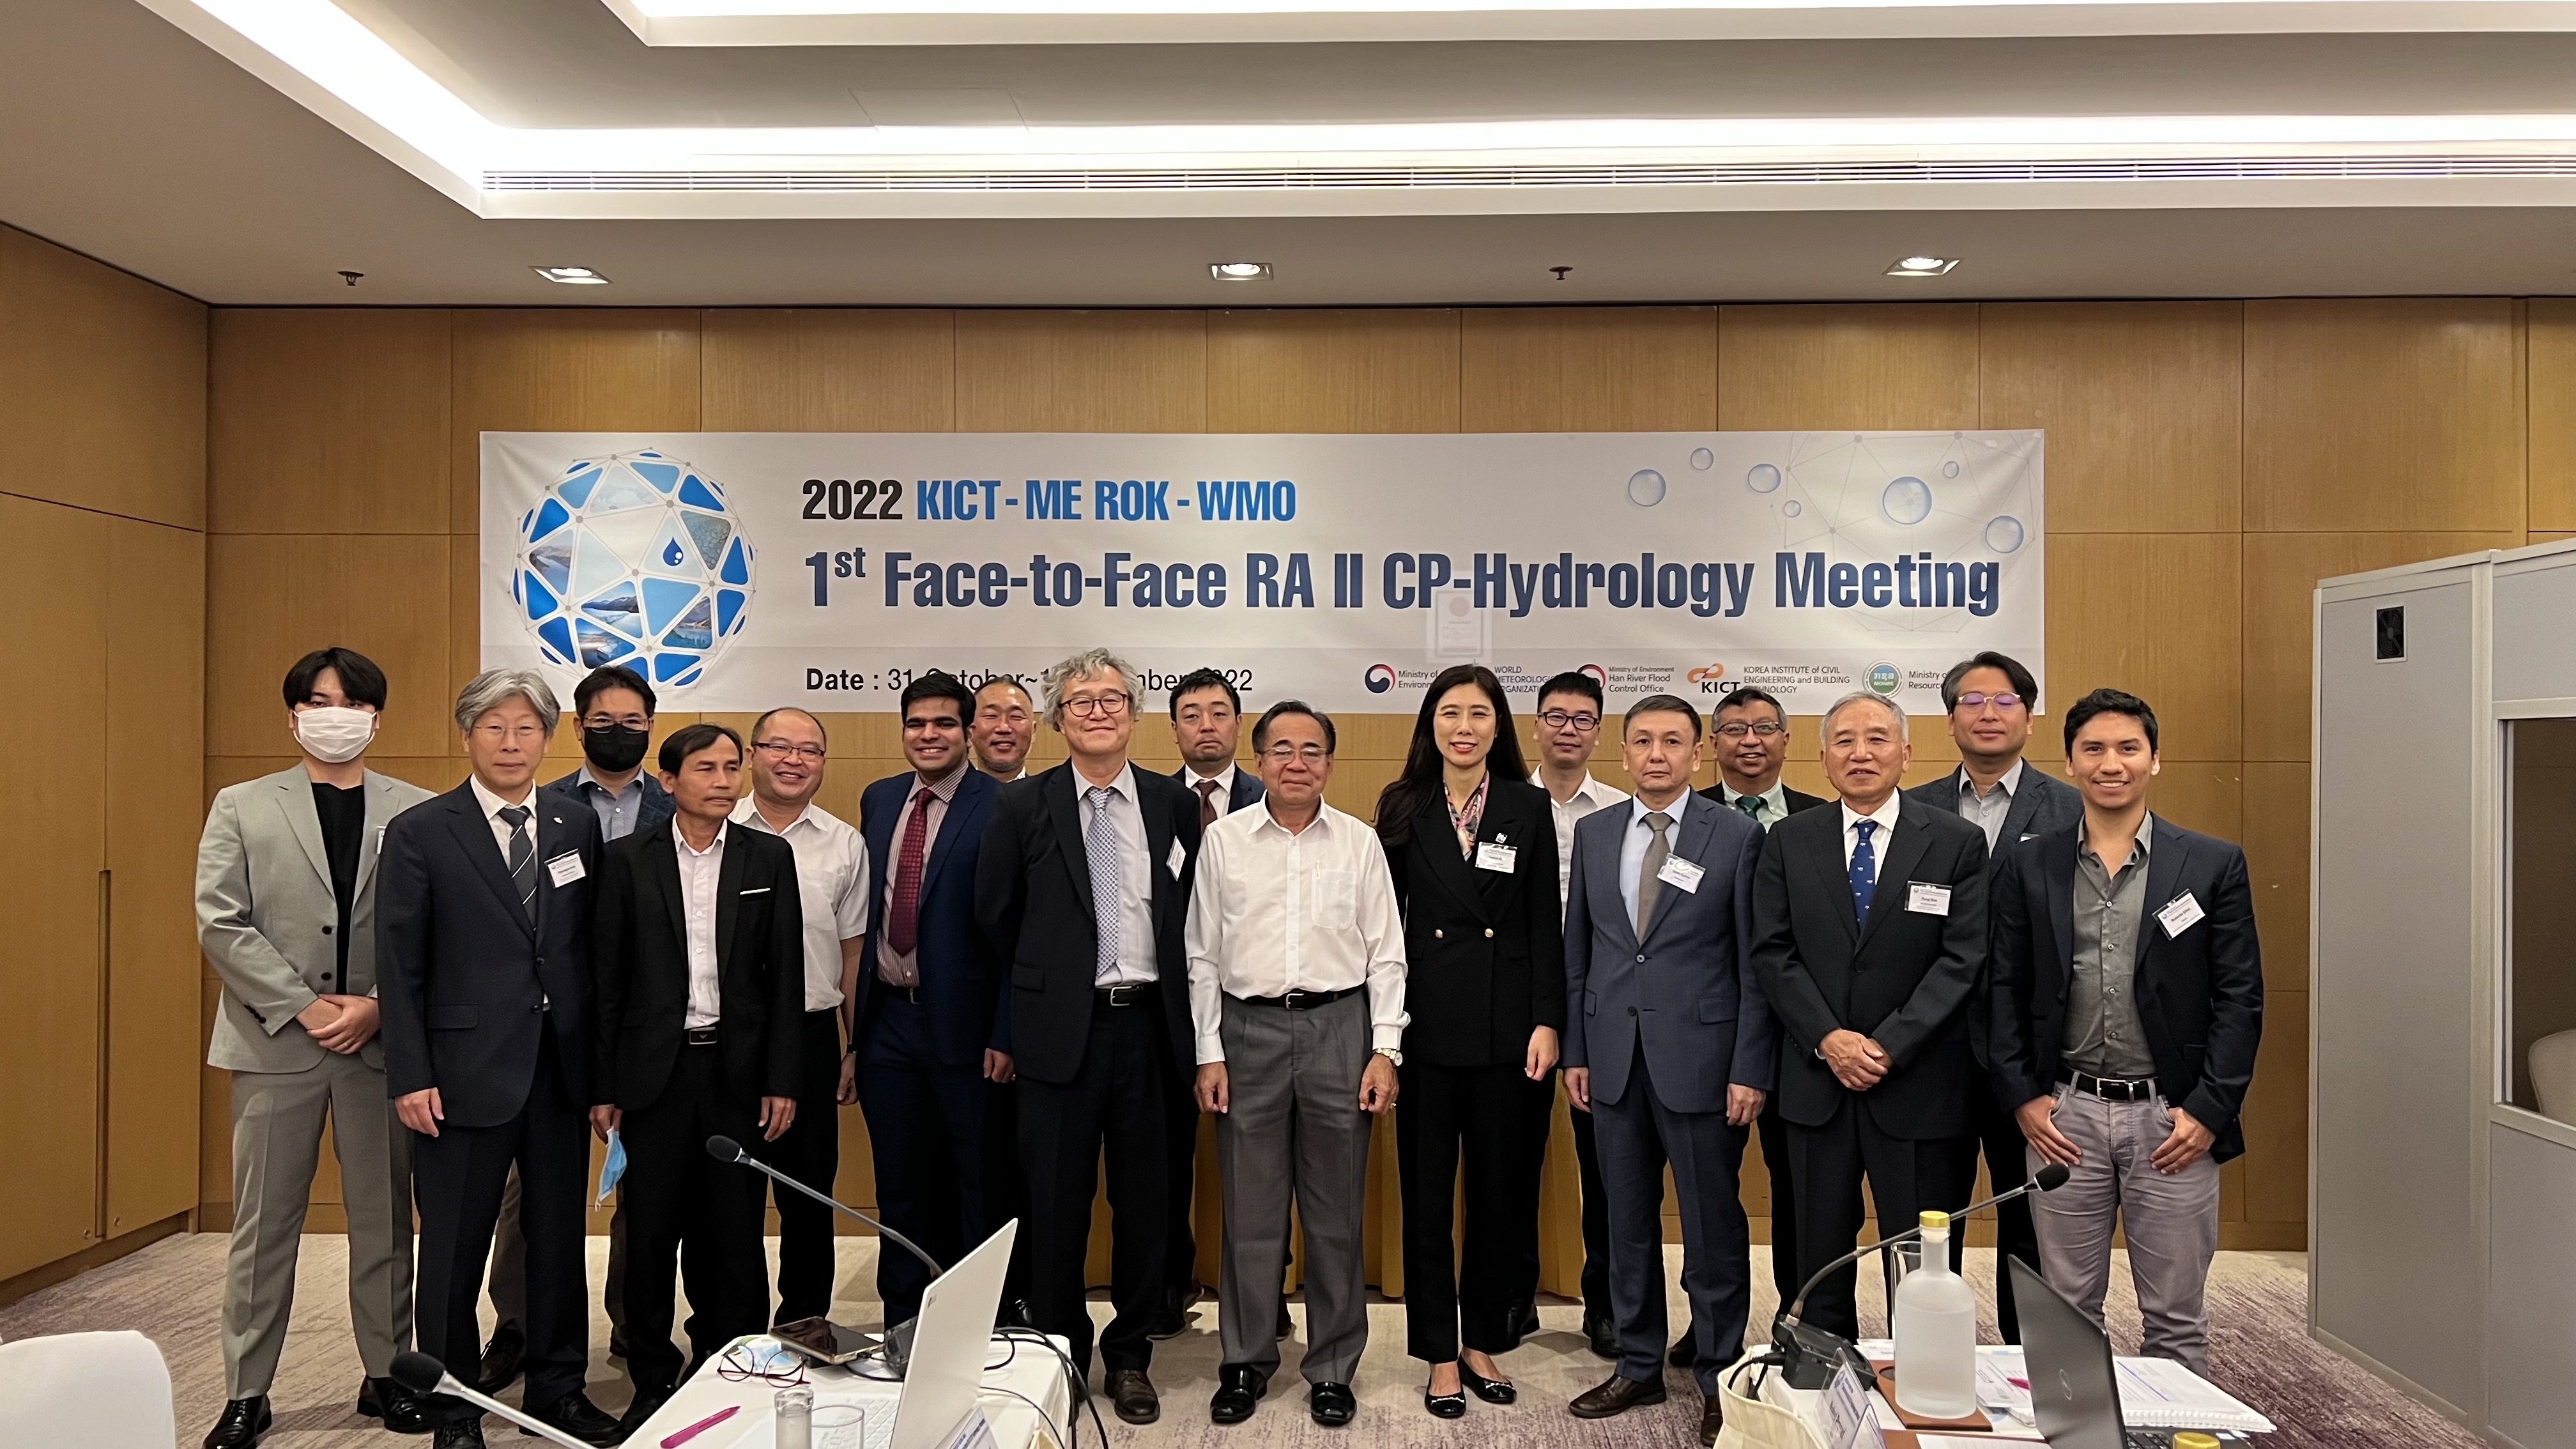 First face-to-face RA II CP-Hydrology meeting